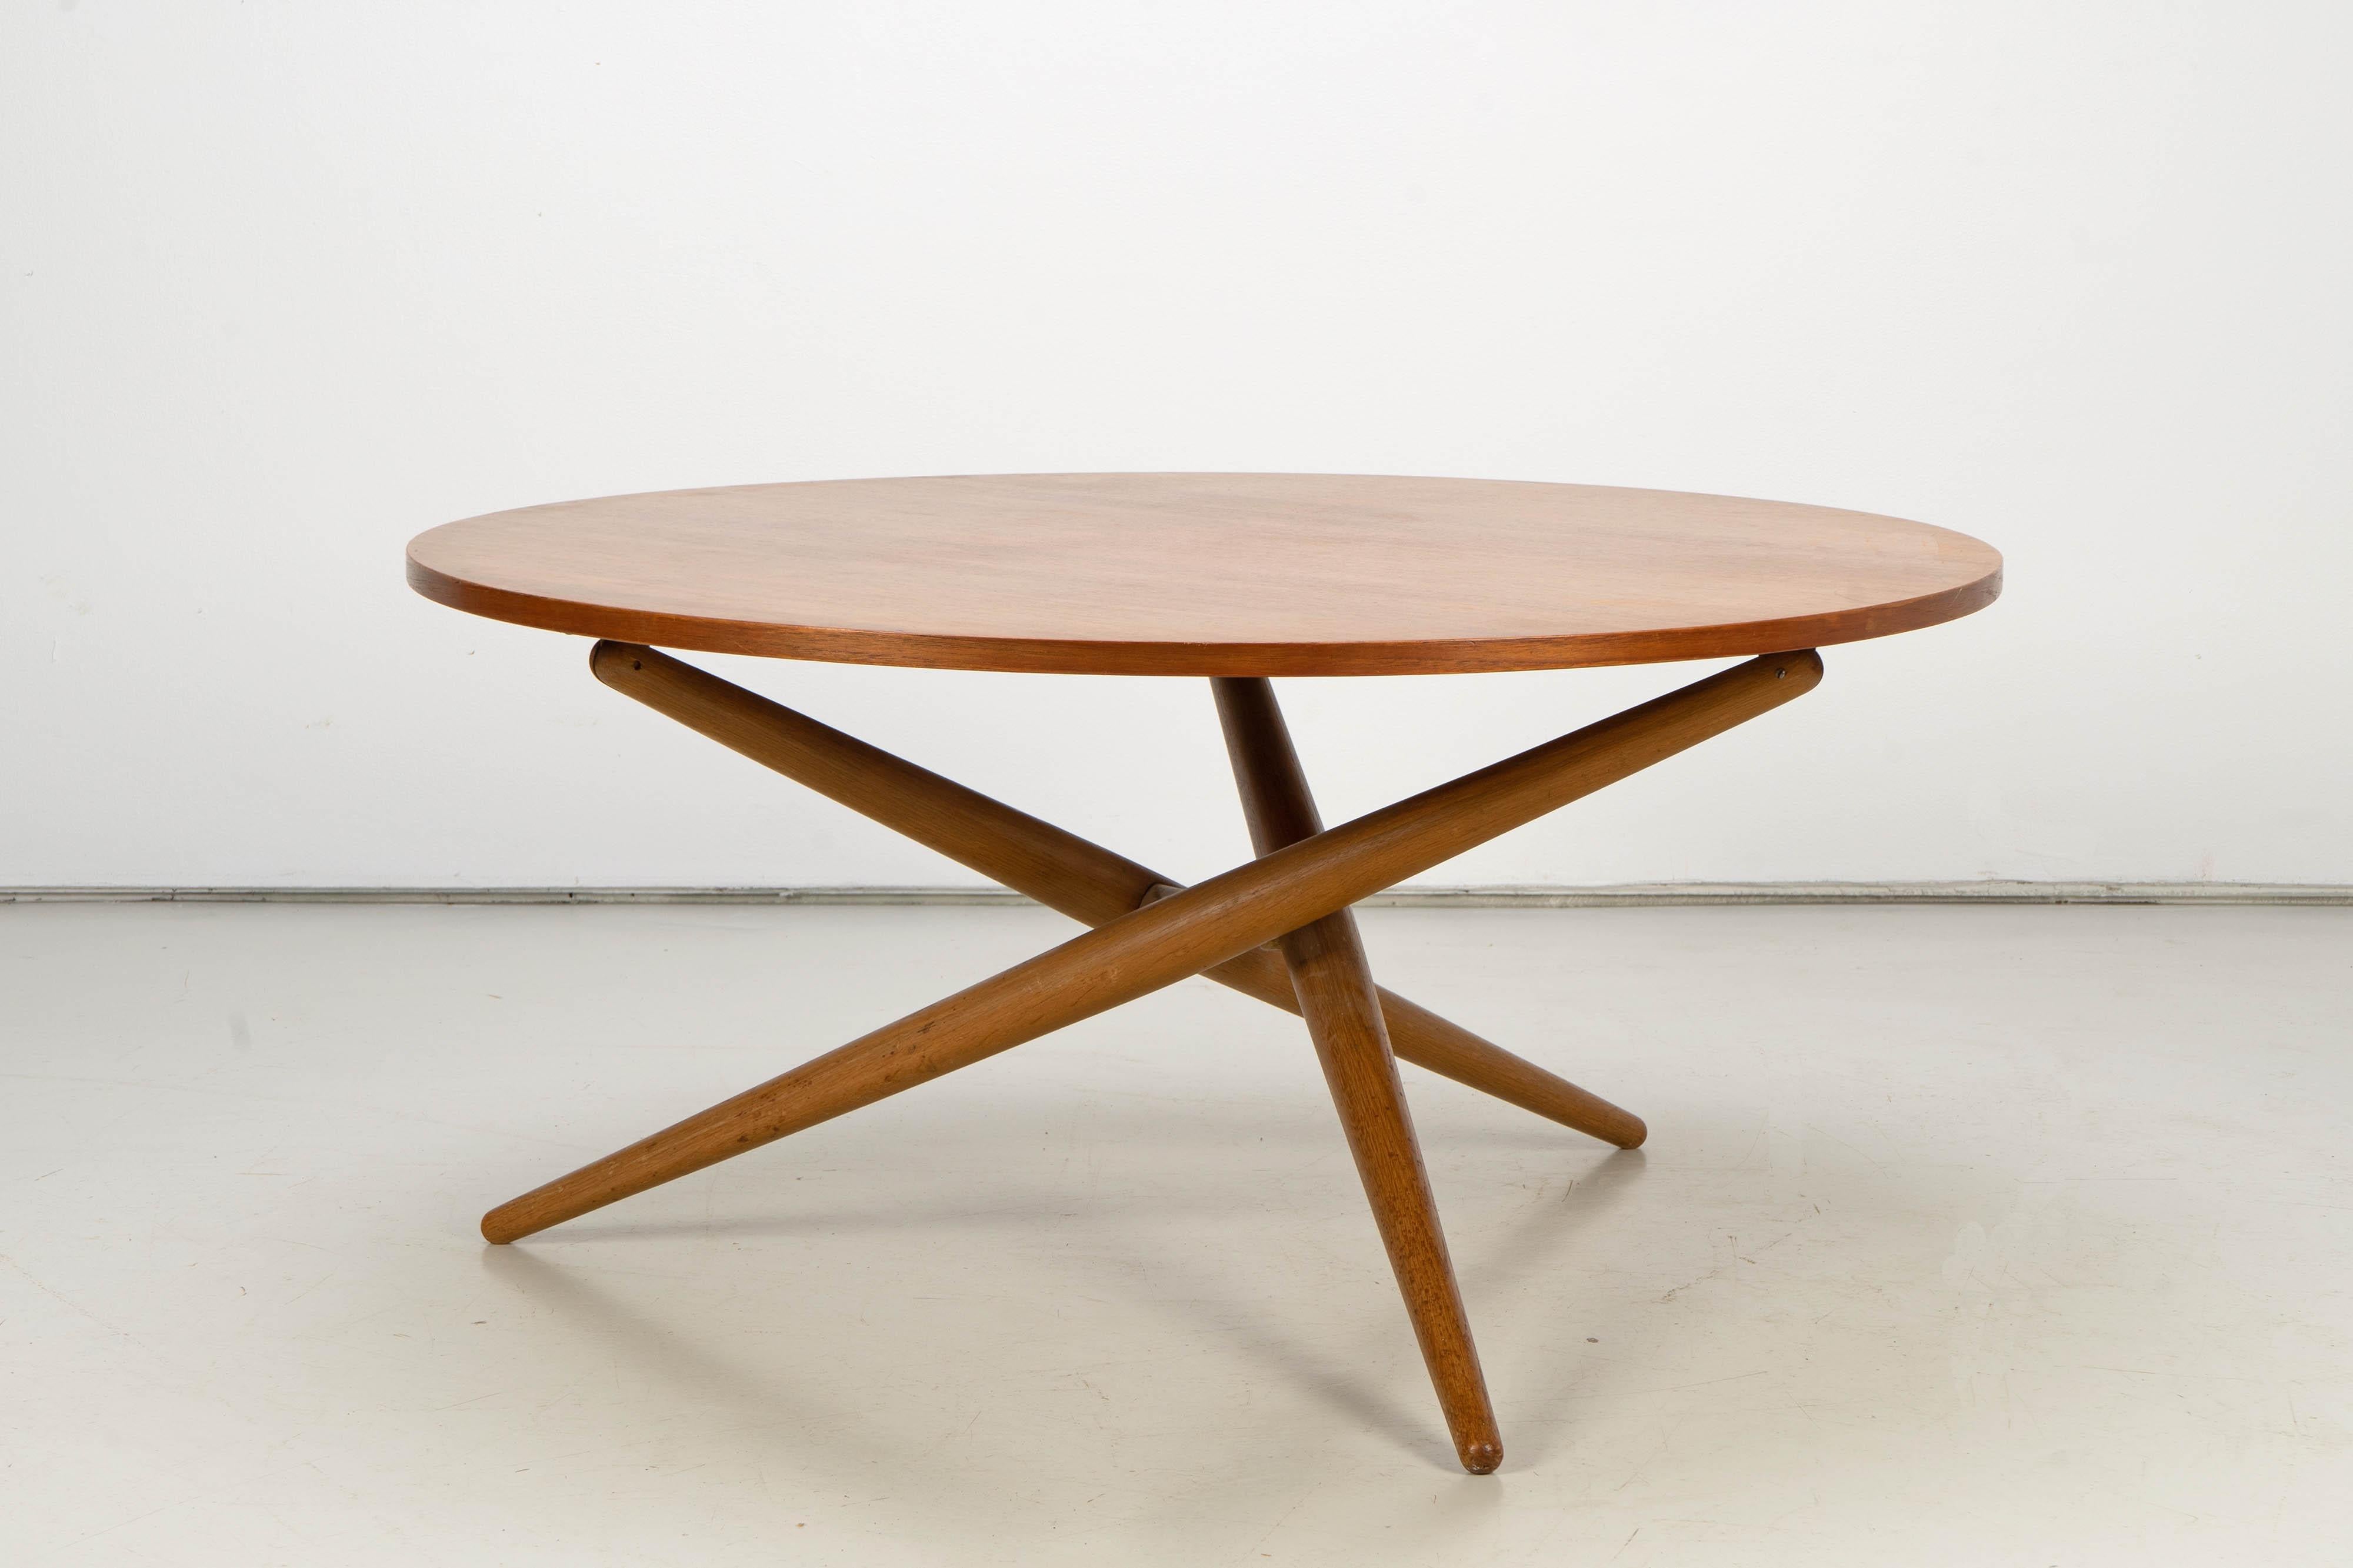 Height-adjustable table by Jürg Bally for Wohnhilfe Zurich, Switzerland. Due to its gear device this piece of furniture designed in 1951 can be transformed from a coffee table to a small dinner table. The gear device features several levels of